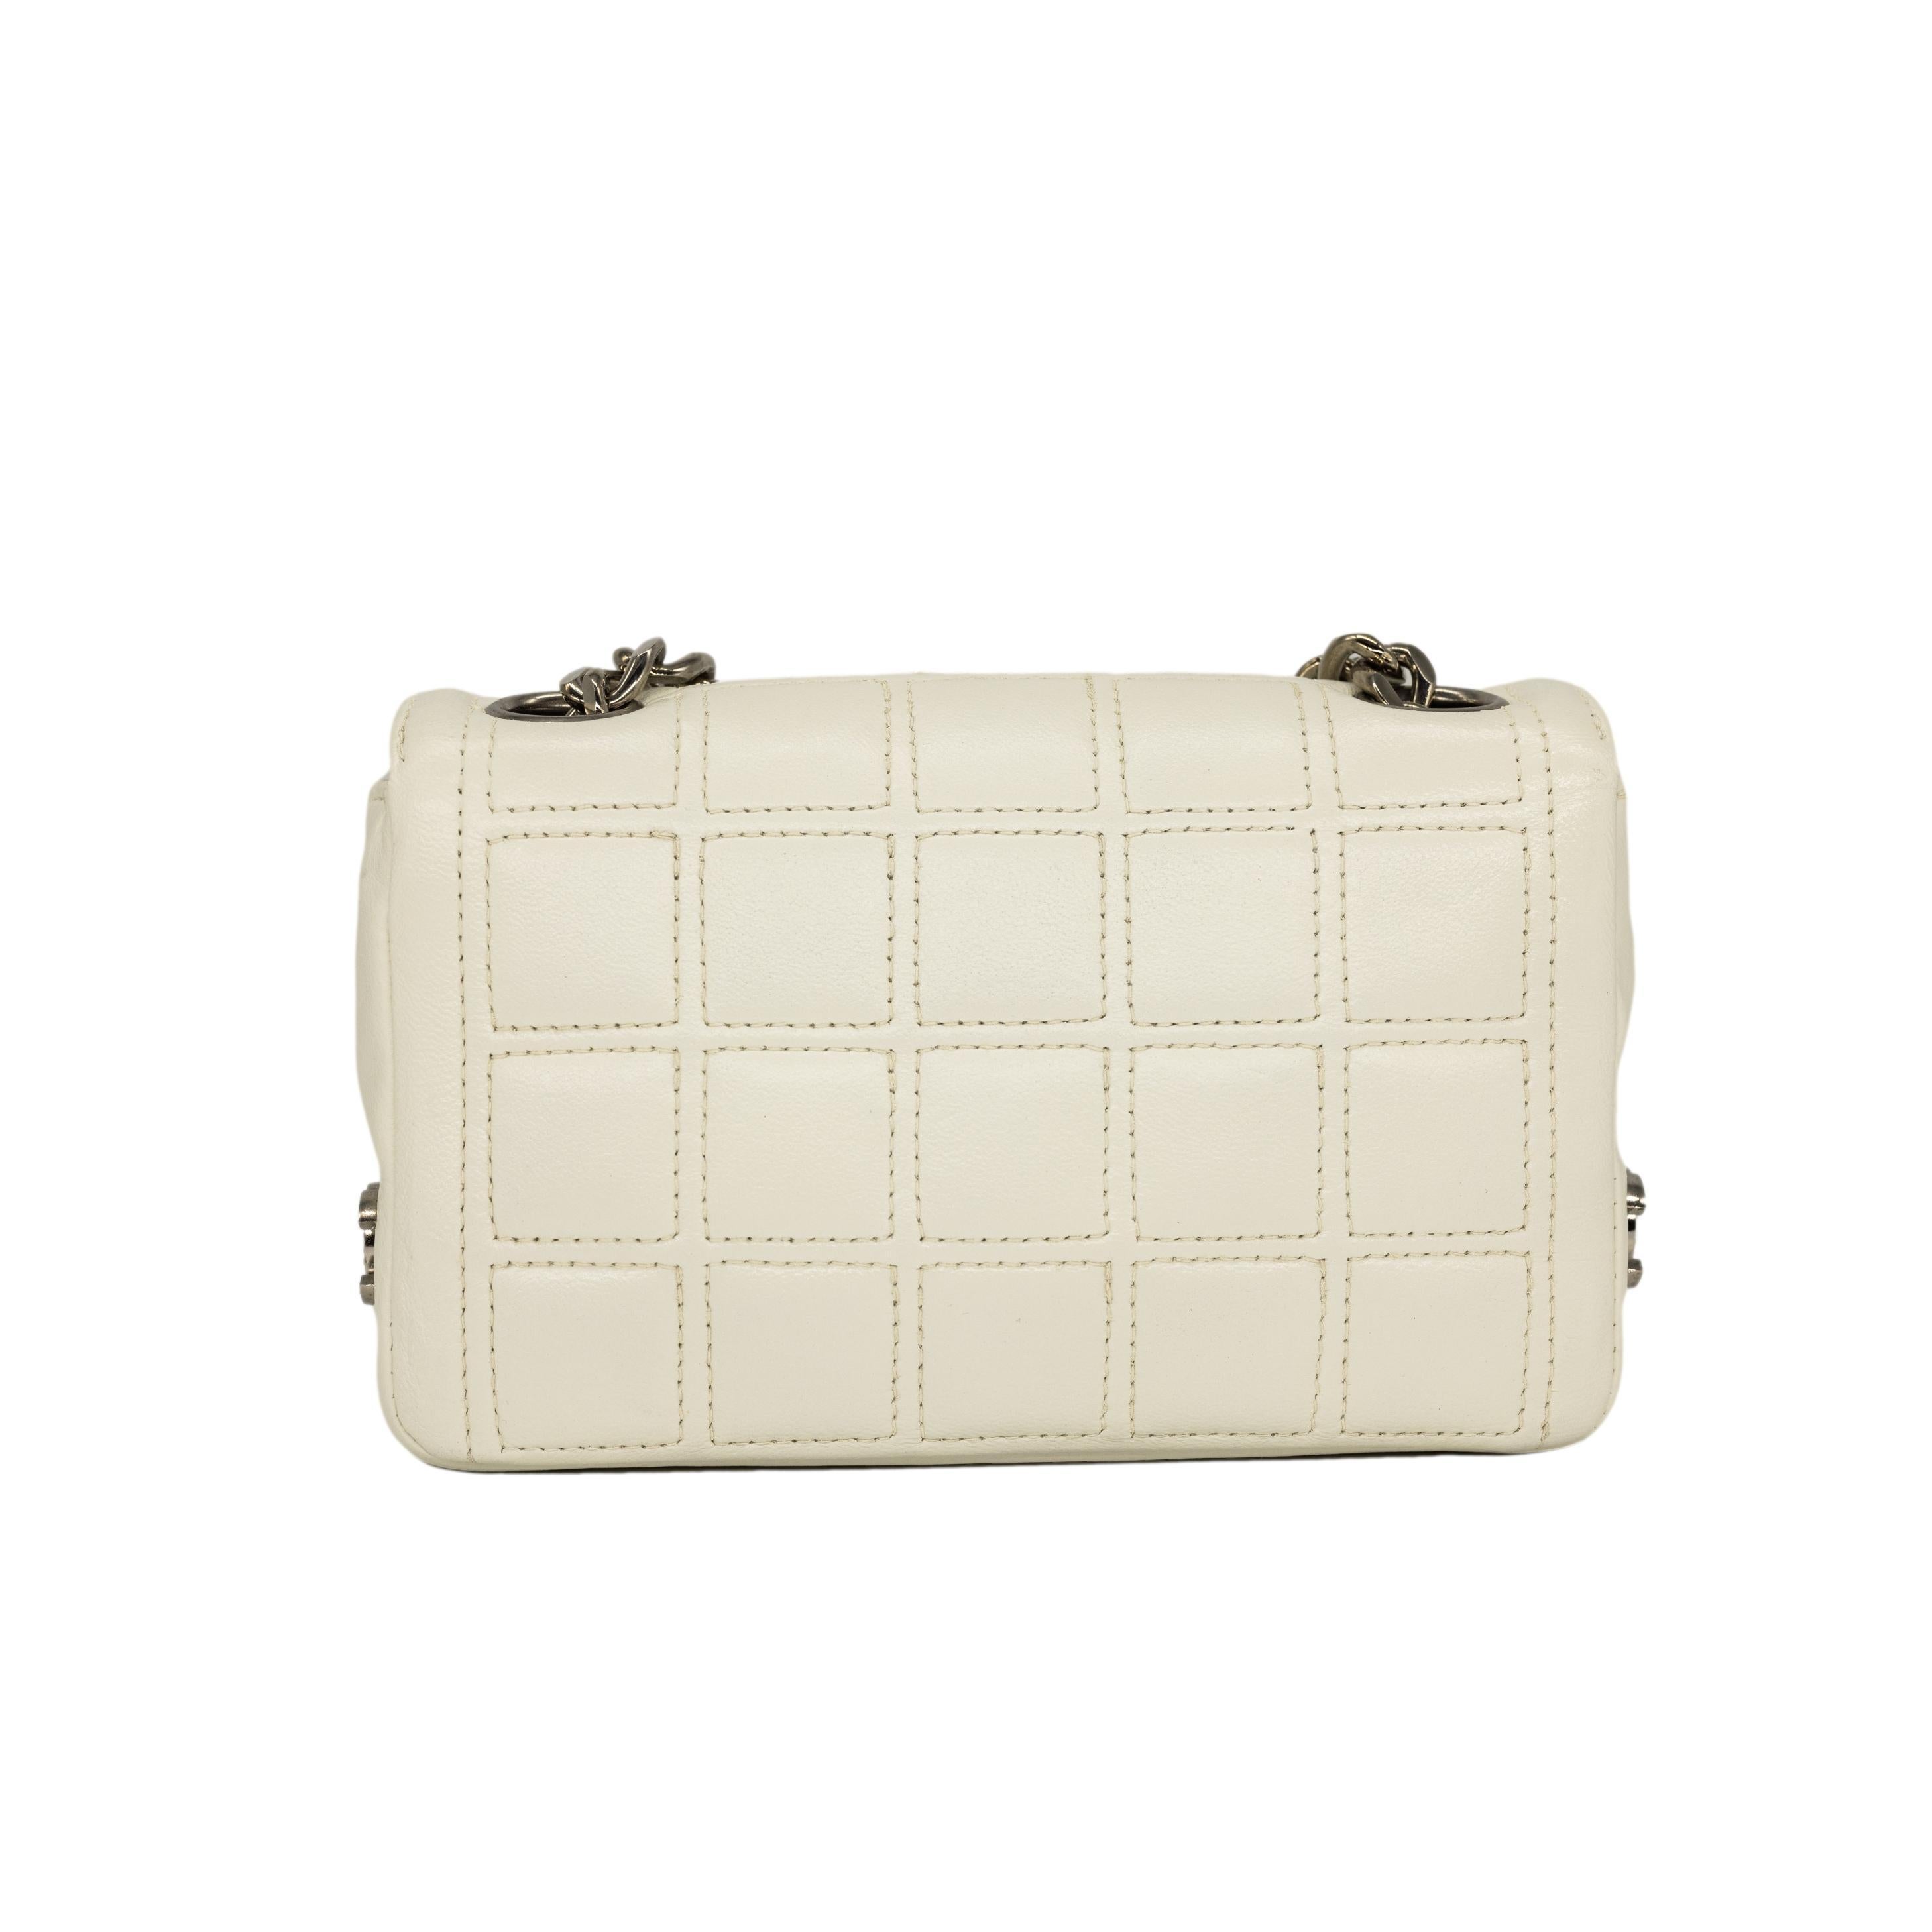 Chanel Limited Edition 2.55 Re-Issue White Mini Chocolate Bar Shoulder Bag, 2002 5